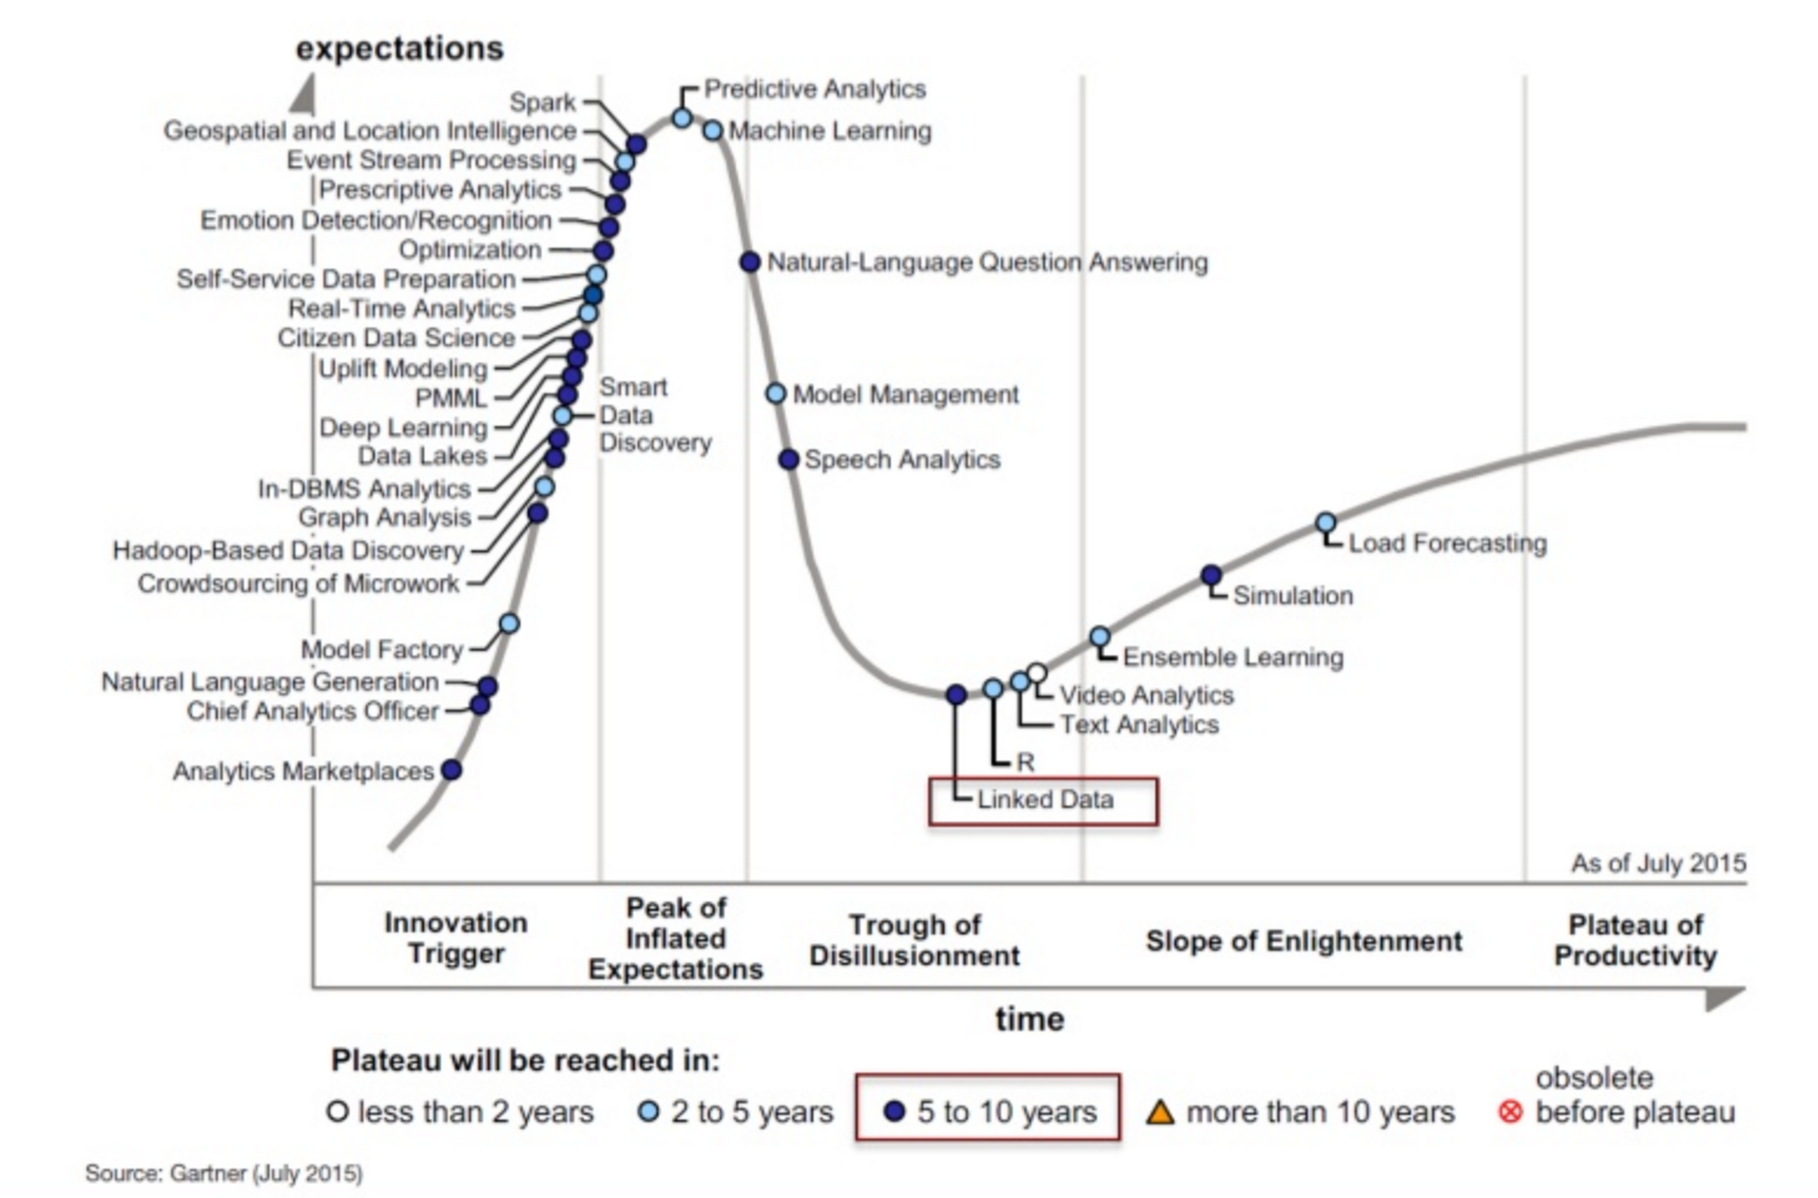 Gartner 2015 Hype Cycle for Advanced Analytics and Data Science.png